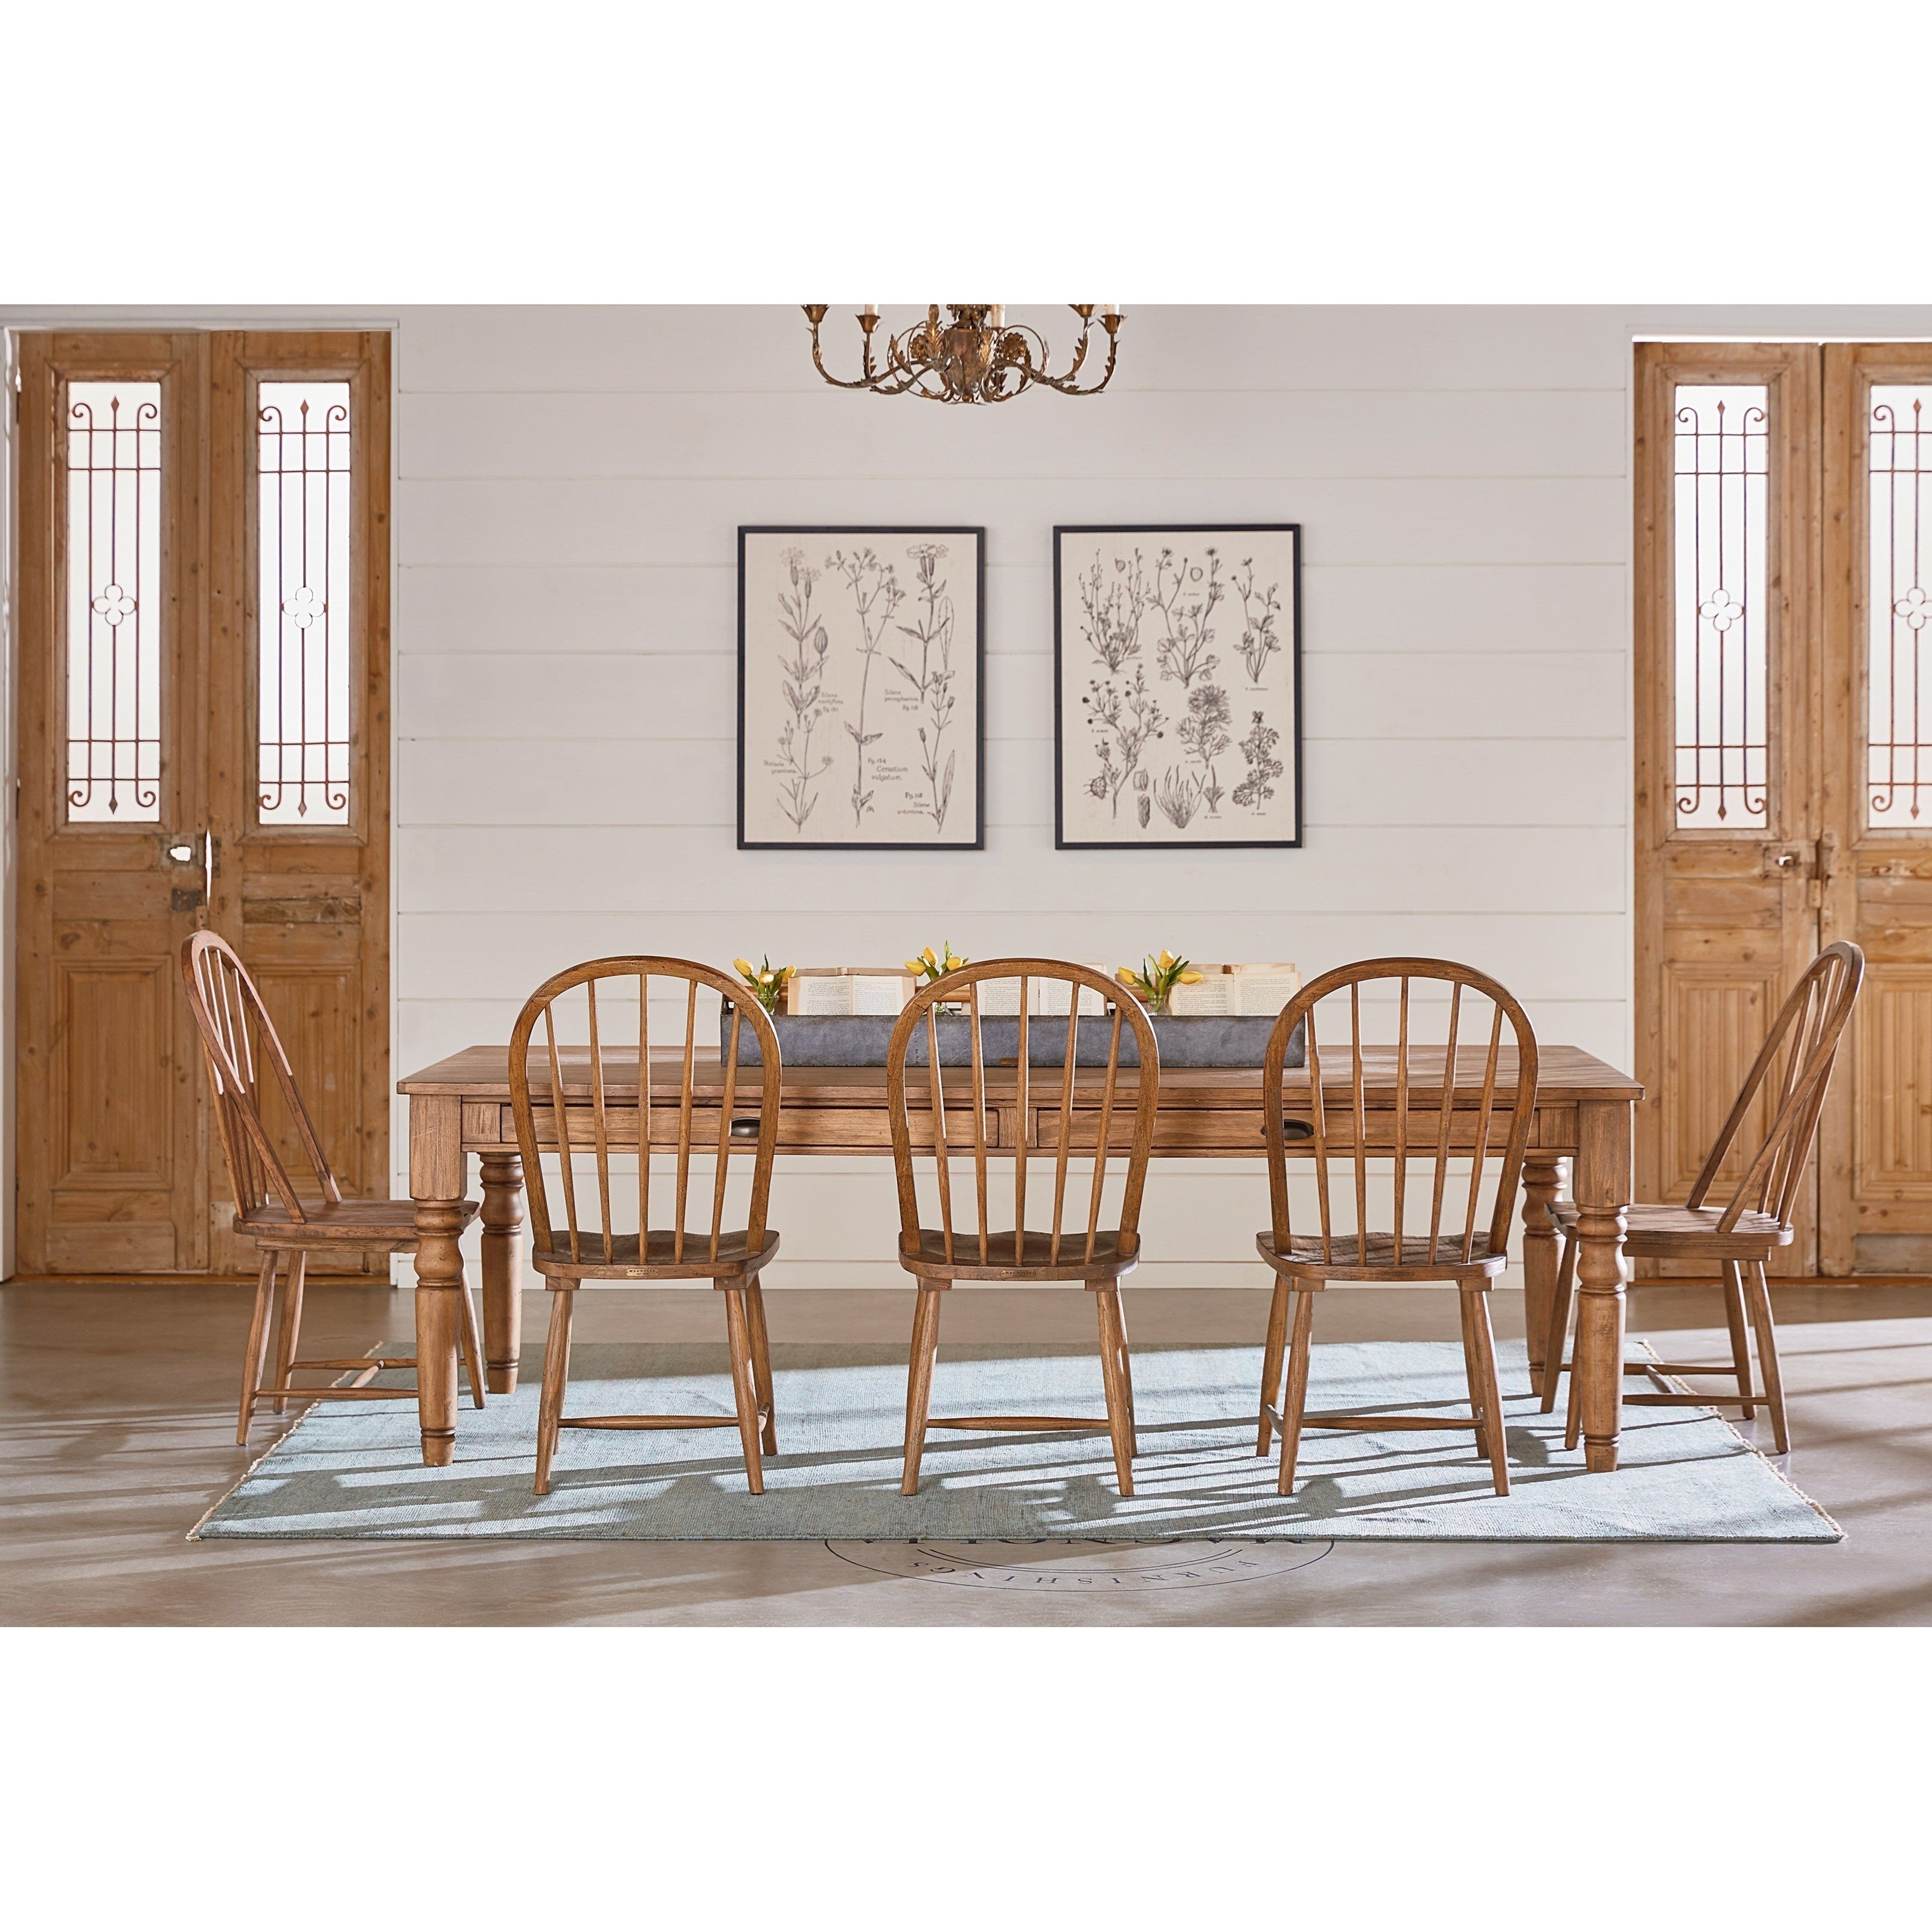 Widely Used Windsor Hoop Chairmagnolia Homejoanna Gaines (View 12 of 20)